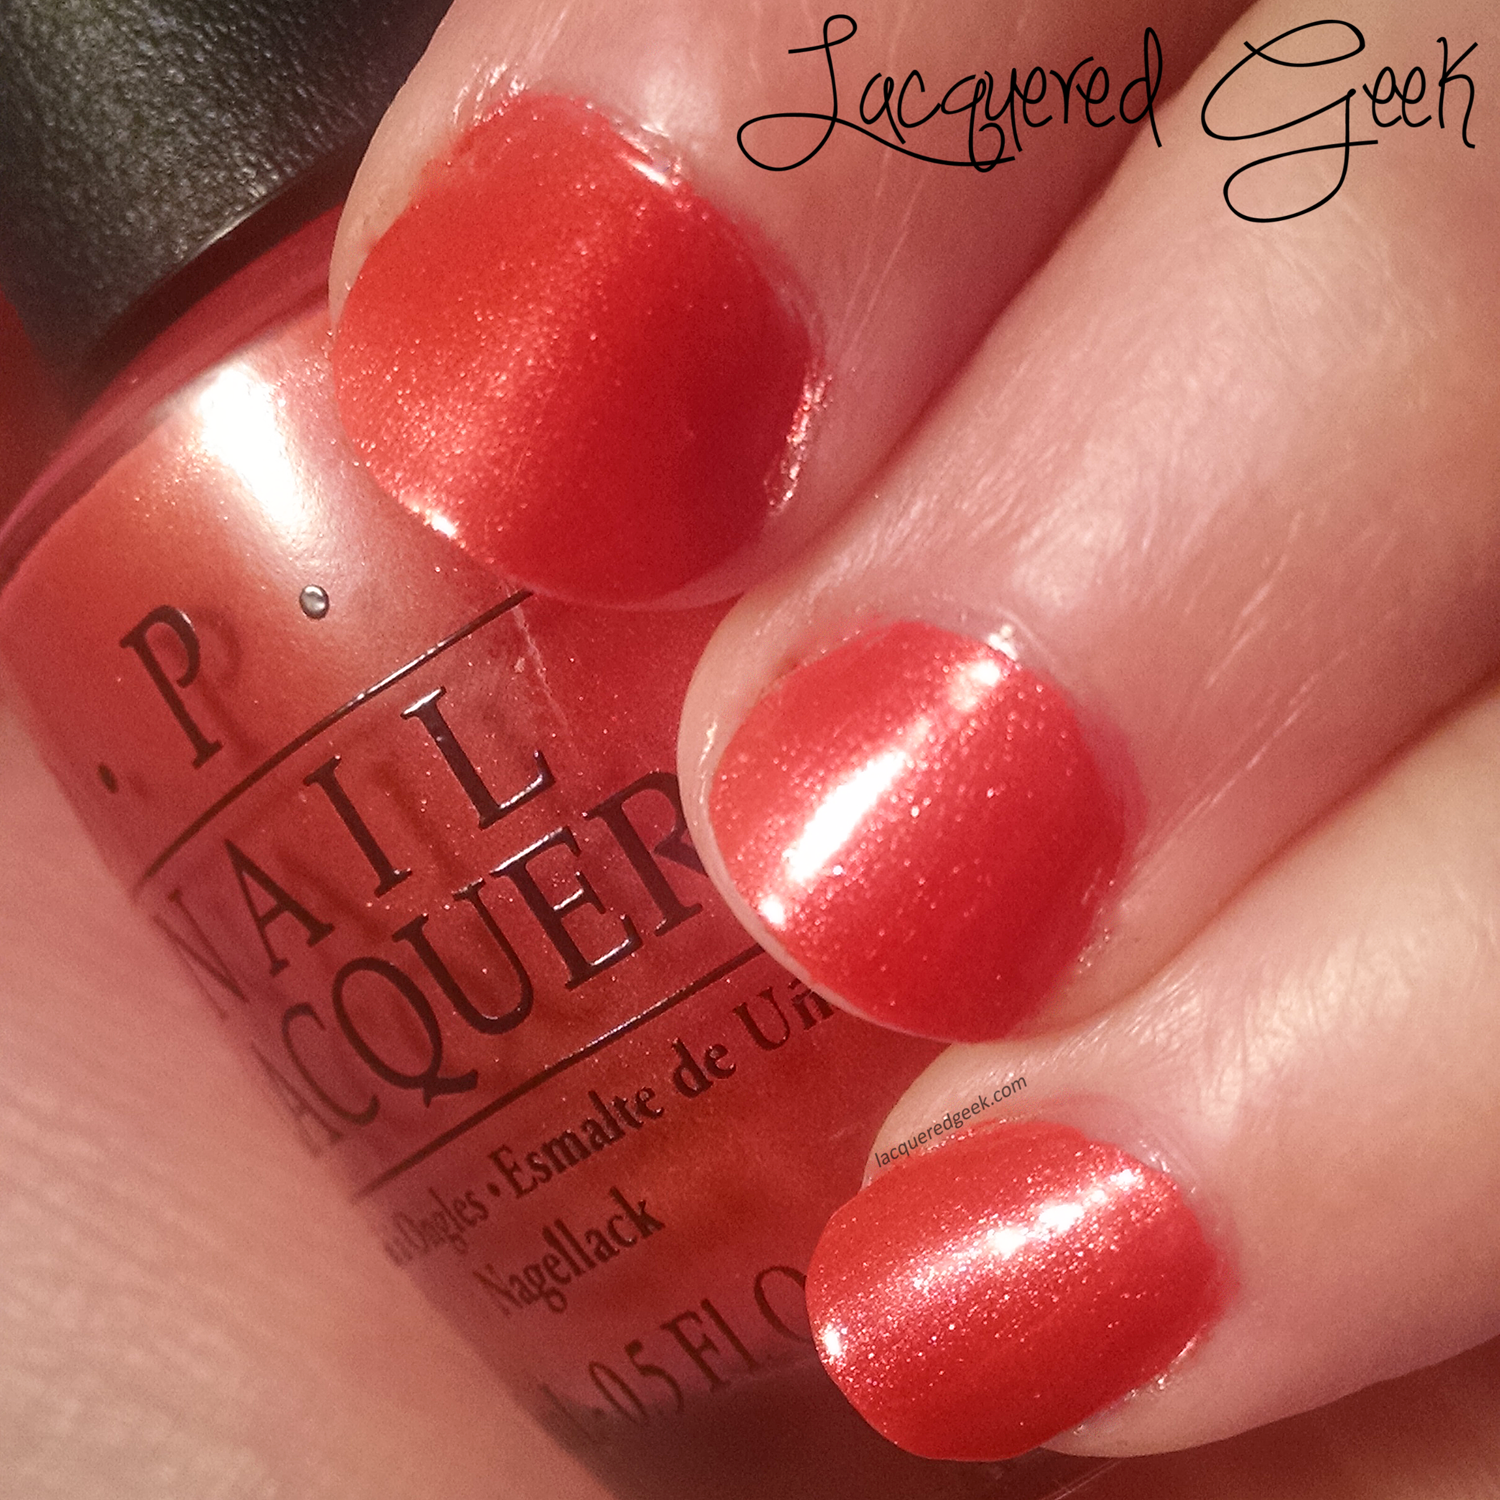 OPI Go With the Lava Flow swatch from the OPI Hawaii collection